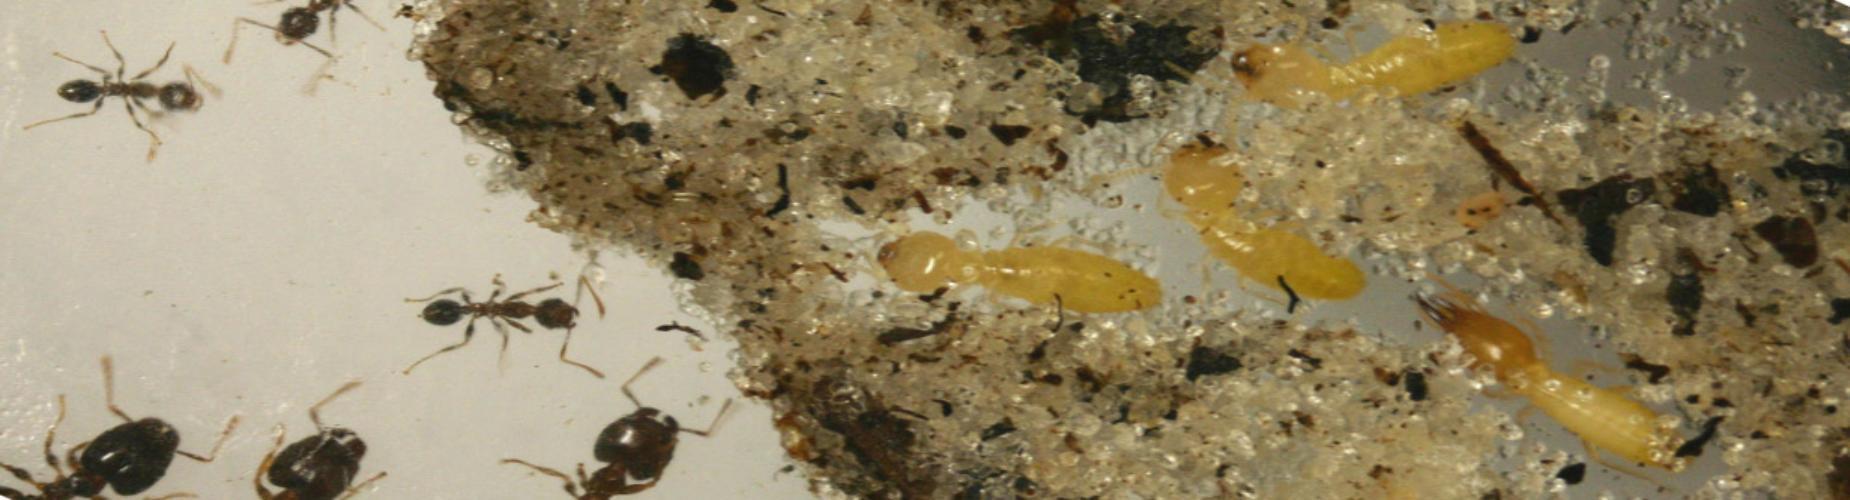 Types of termites- banner